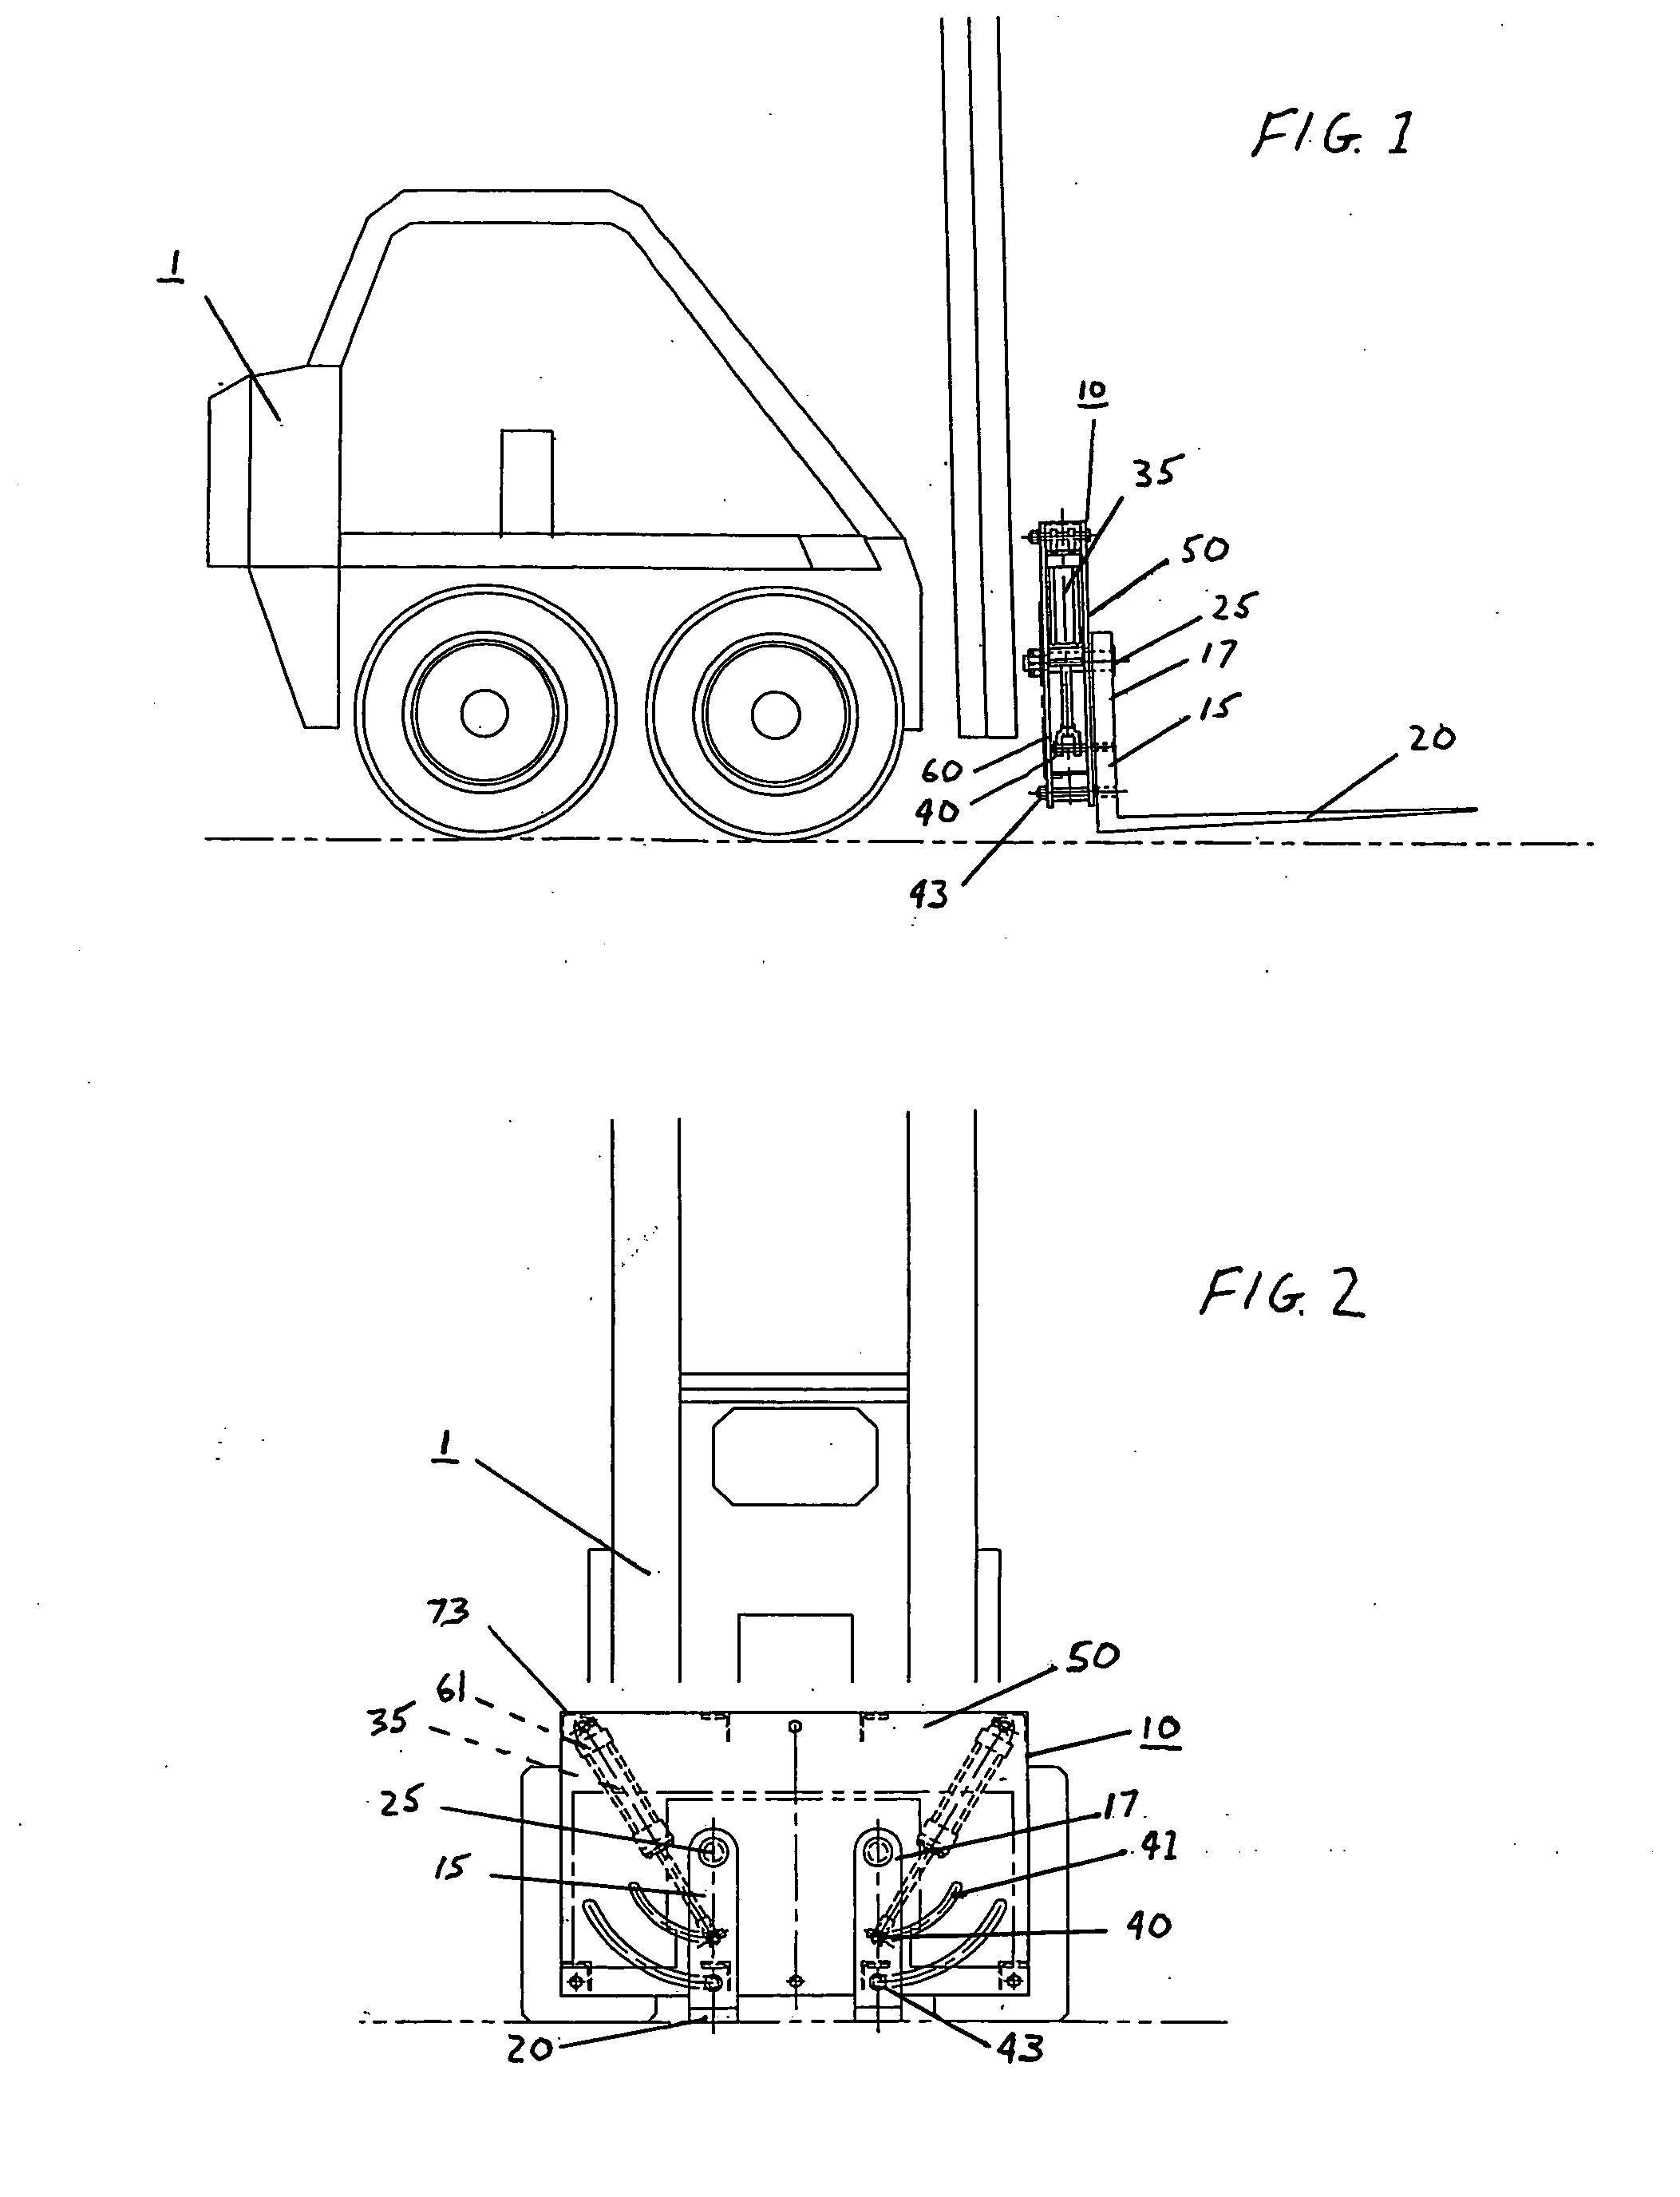 Apparatus and method for the disposal of waste